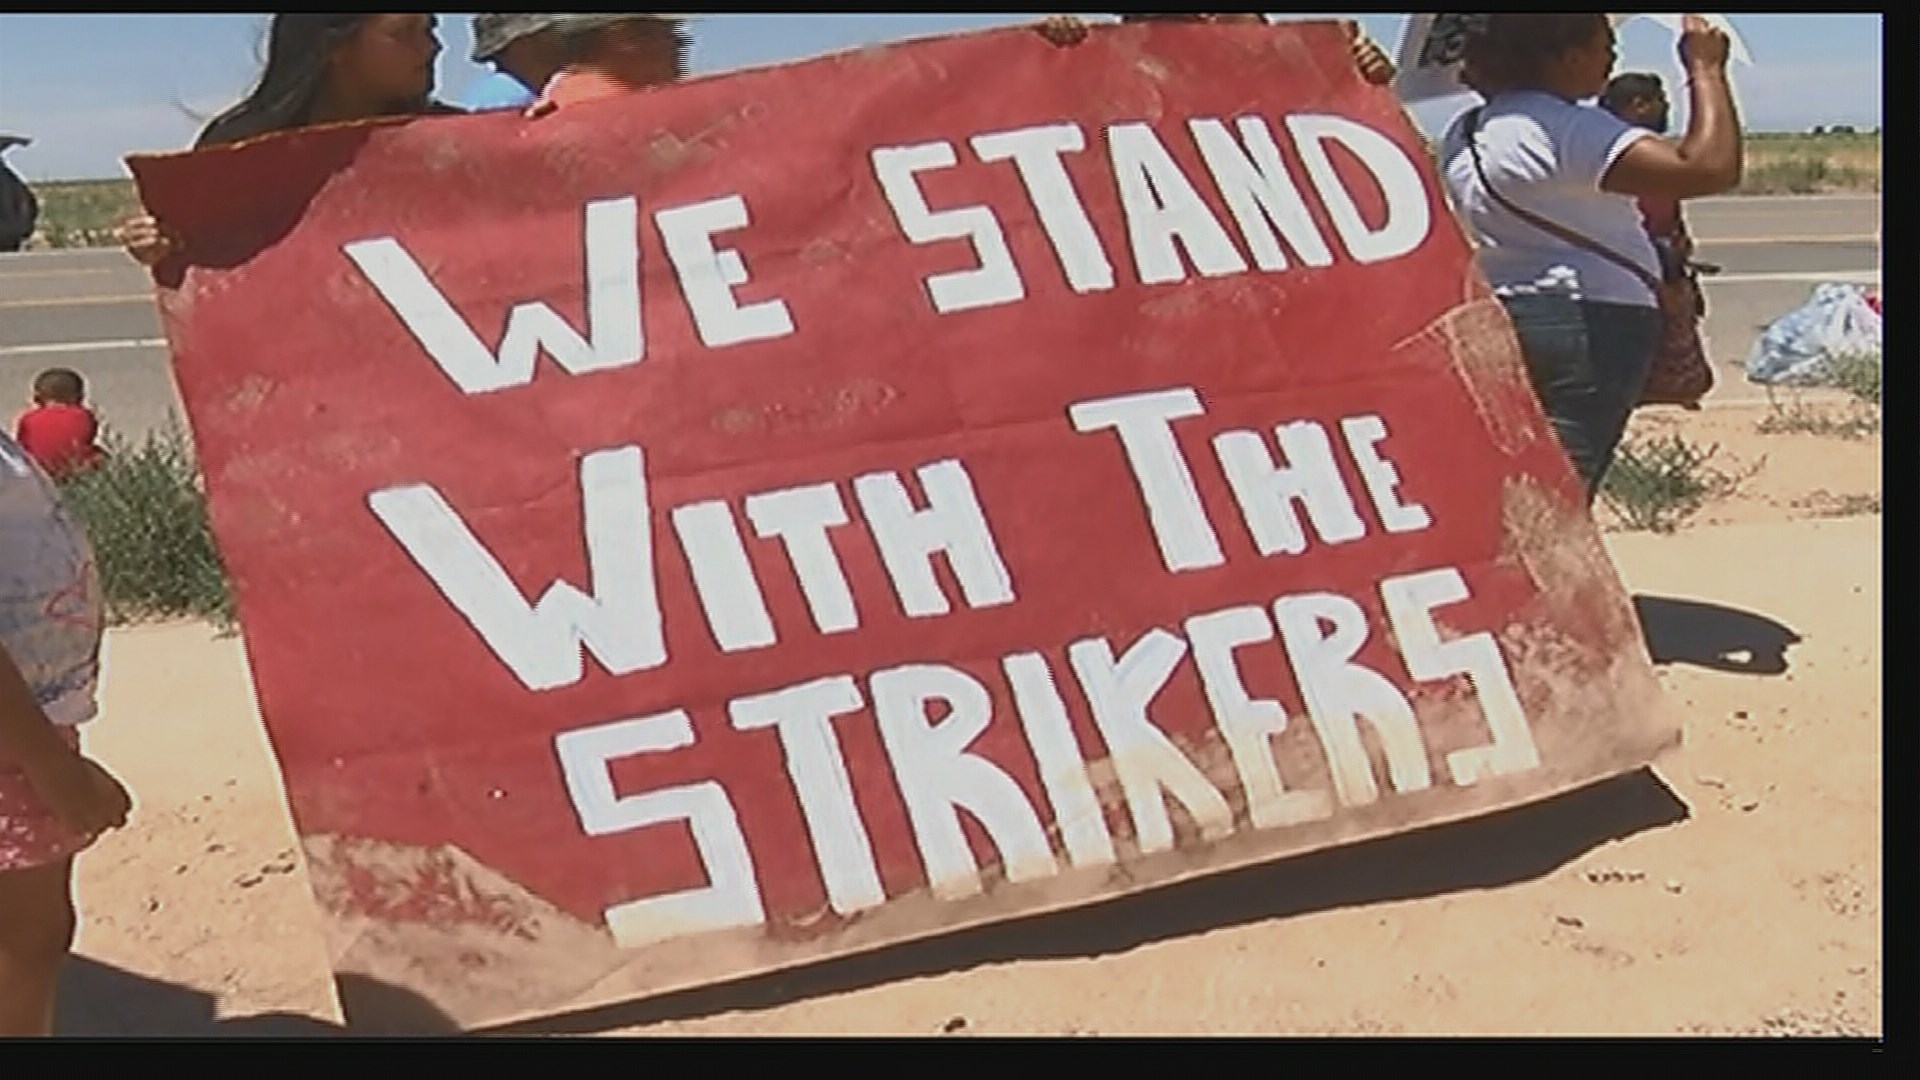 200 detainees stage hunger strike at Eloy Detention Center - Arizona's Family1920 x 1080